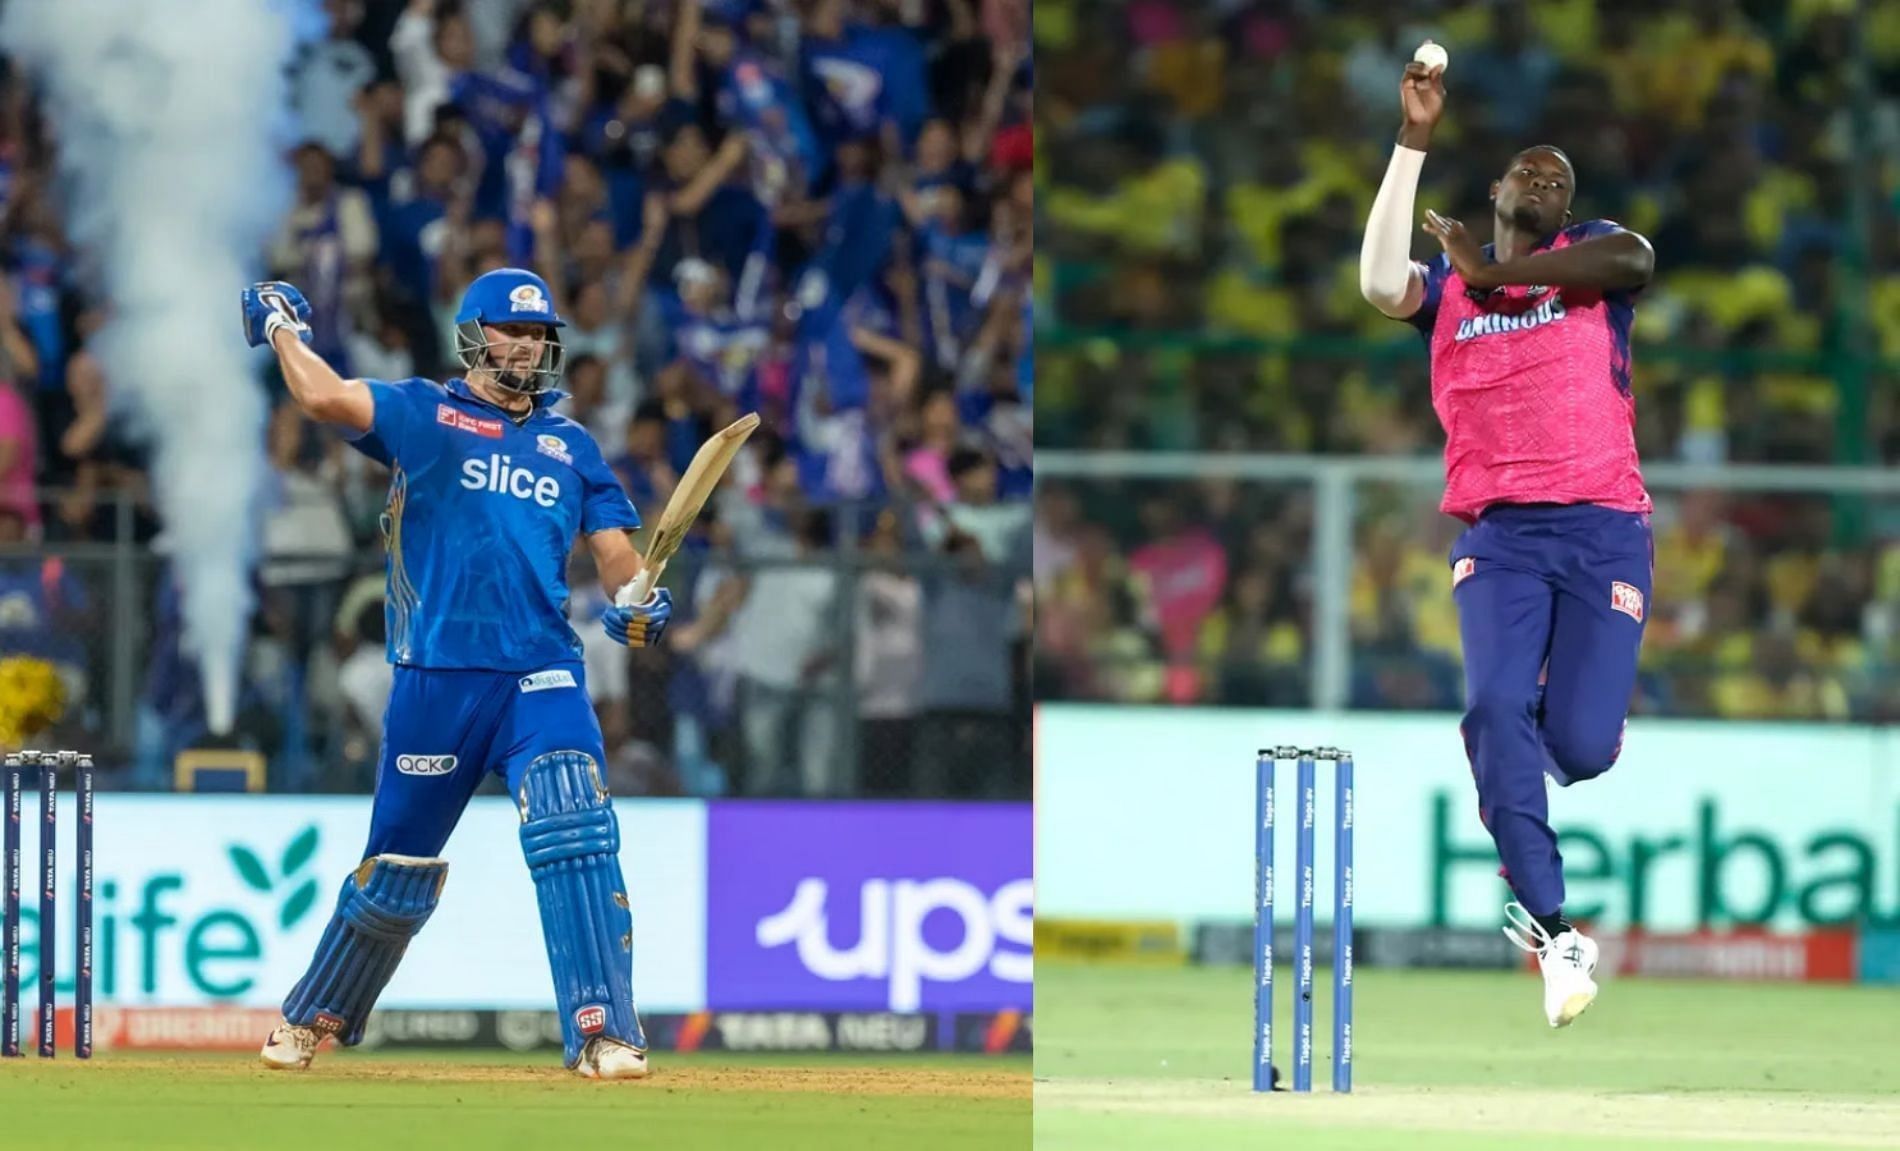 Tim David took Jason Holder (R) to the cleaners in the Rajasthan Royals&#039; last game. [P/C: iplt20.com]